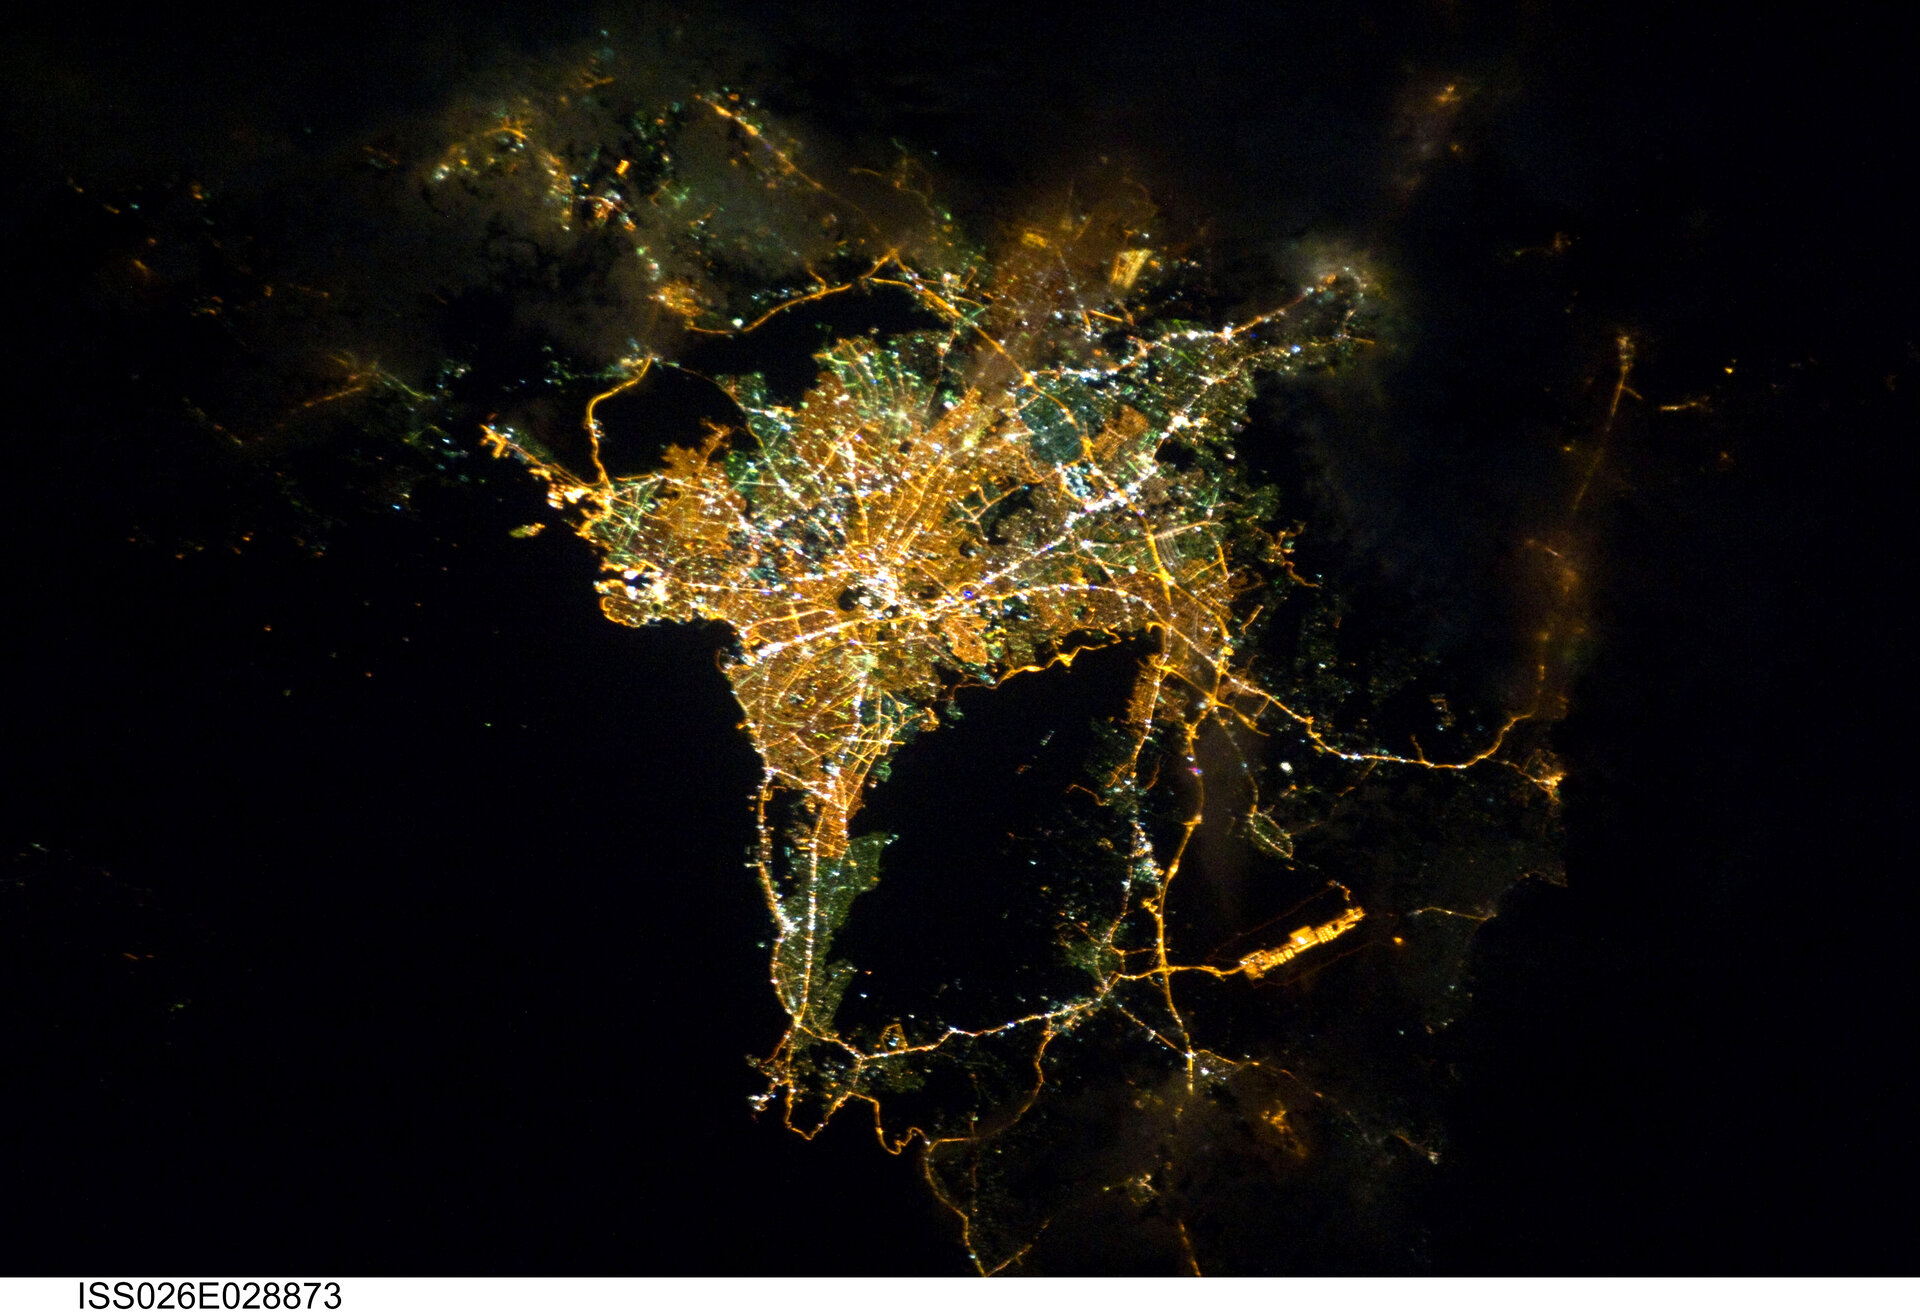 Athens, seen by Paolo Nespoli from ISS